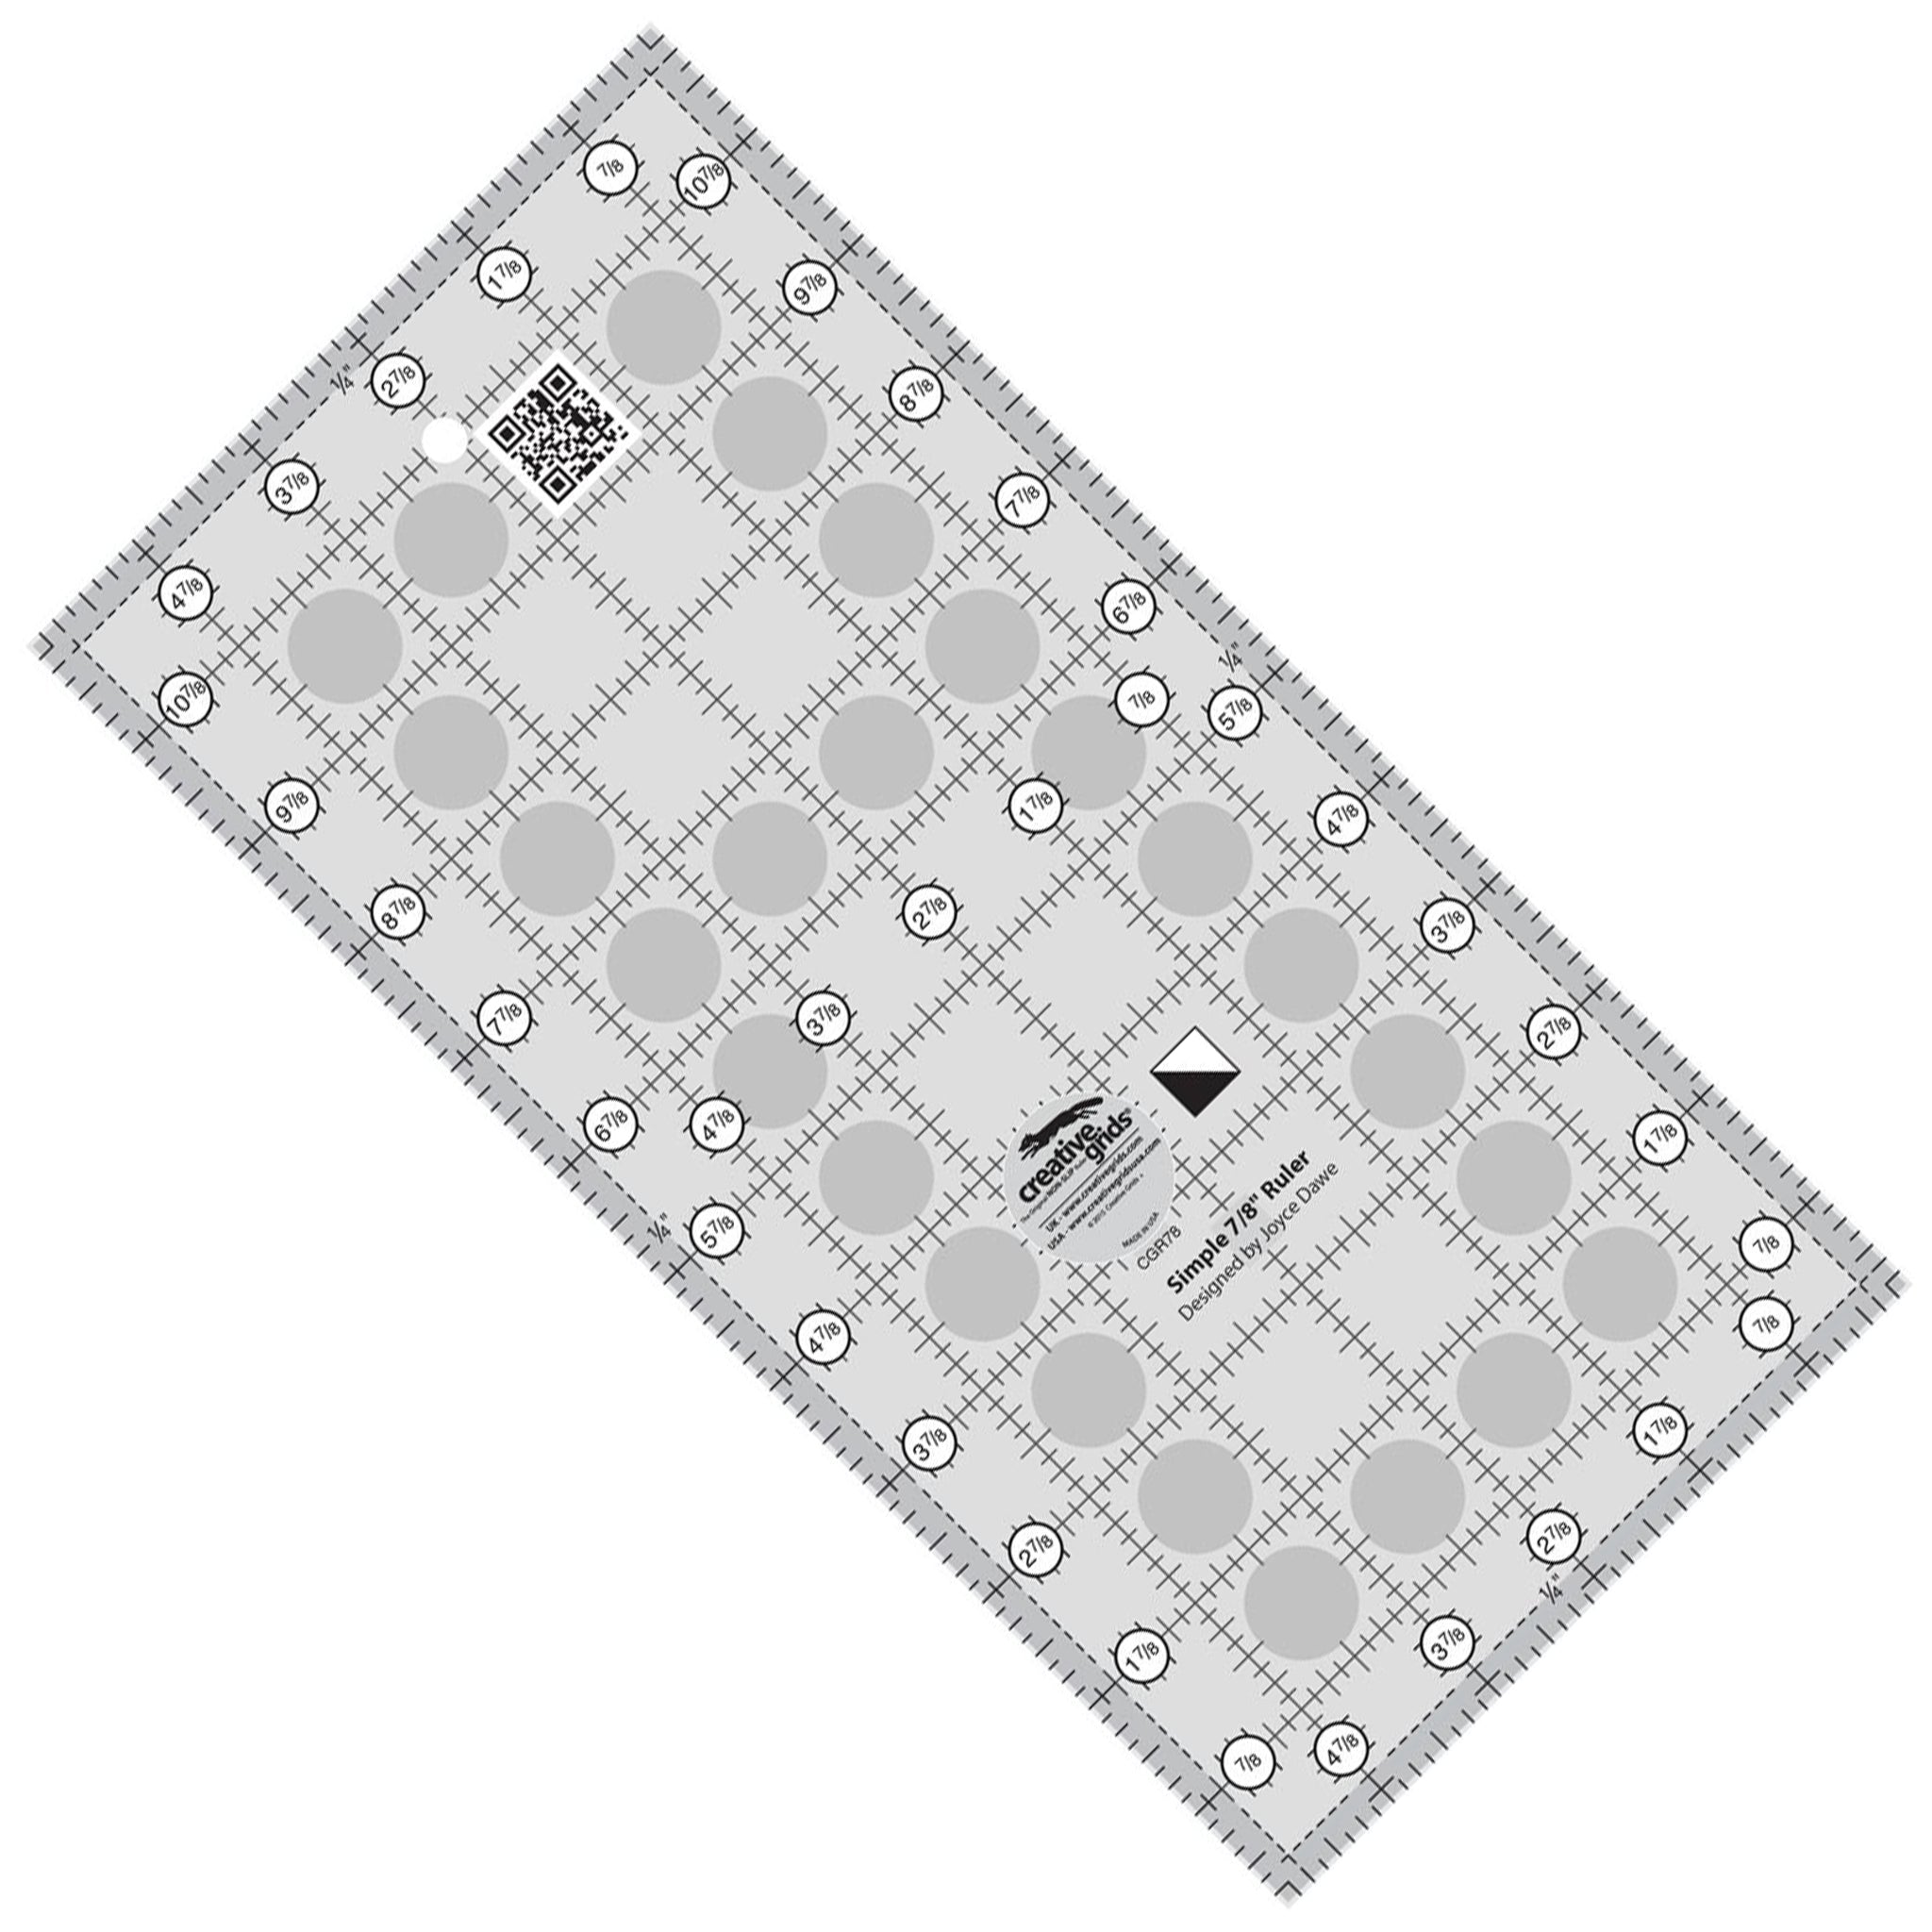 Creative Grids Simple 7/8 Half Square Triangles Maker Quilt Ruler (CGR78)